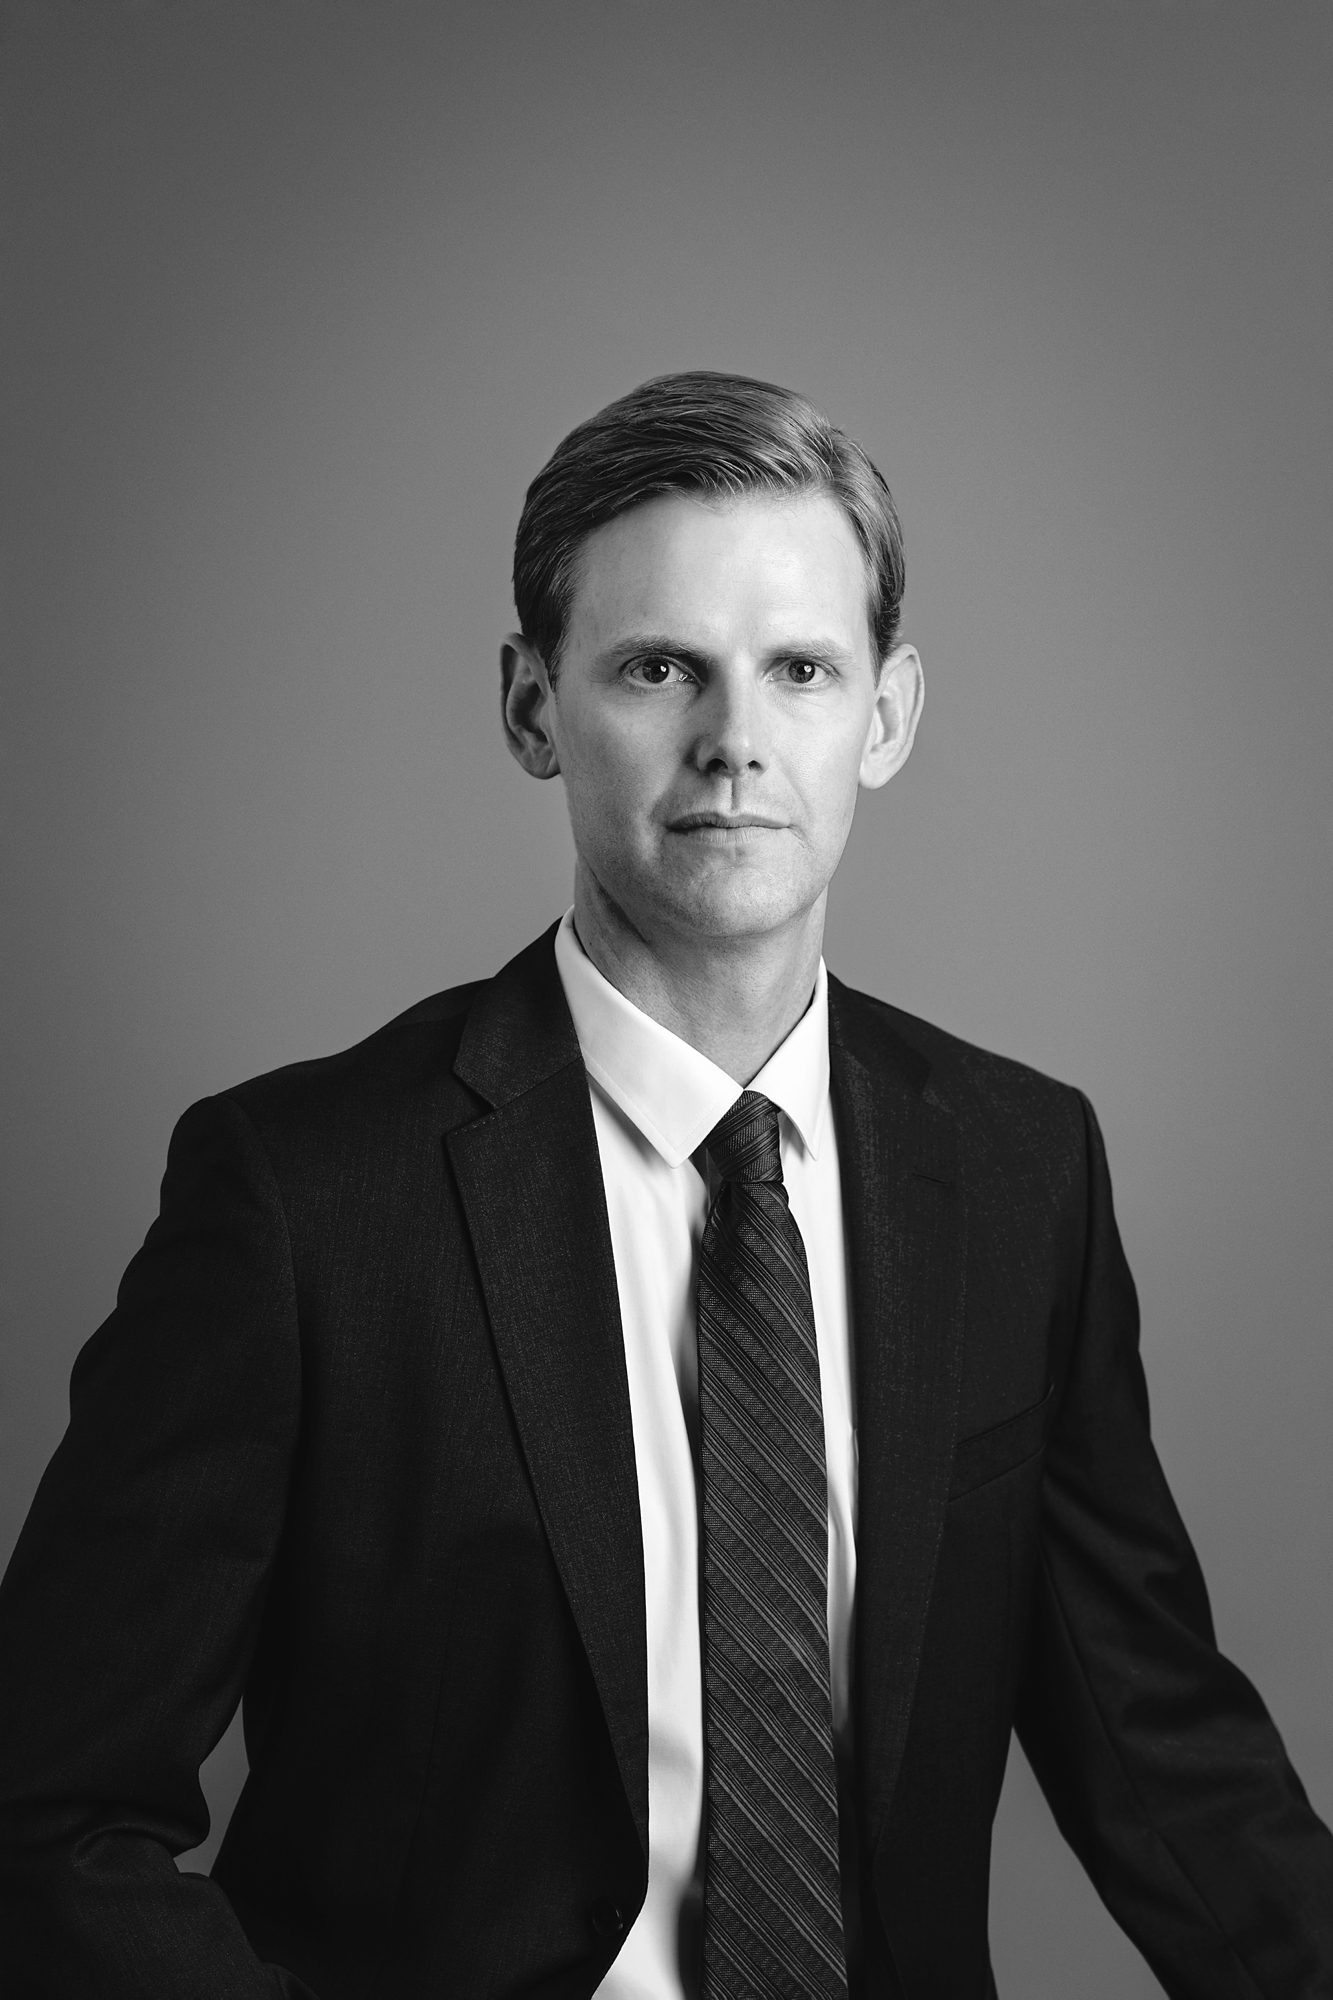 Black and white studio headshot portrait of a man. He has a serious expression on his face, and is wearing a dark colored suit and tie with a white shirt. Photographed by Overland Park photographer Faces You Love.